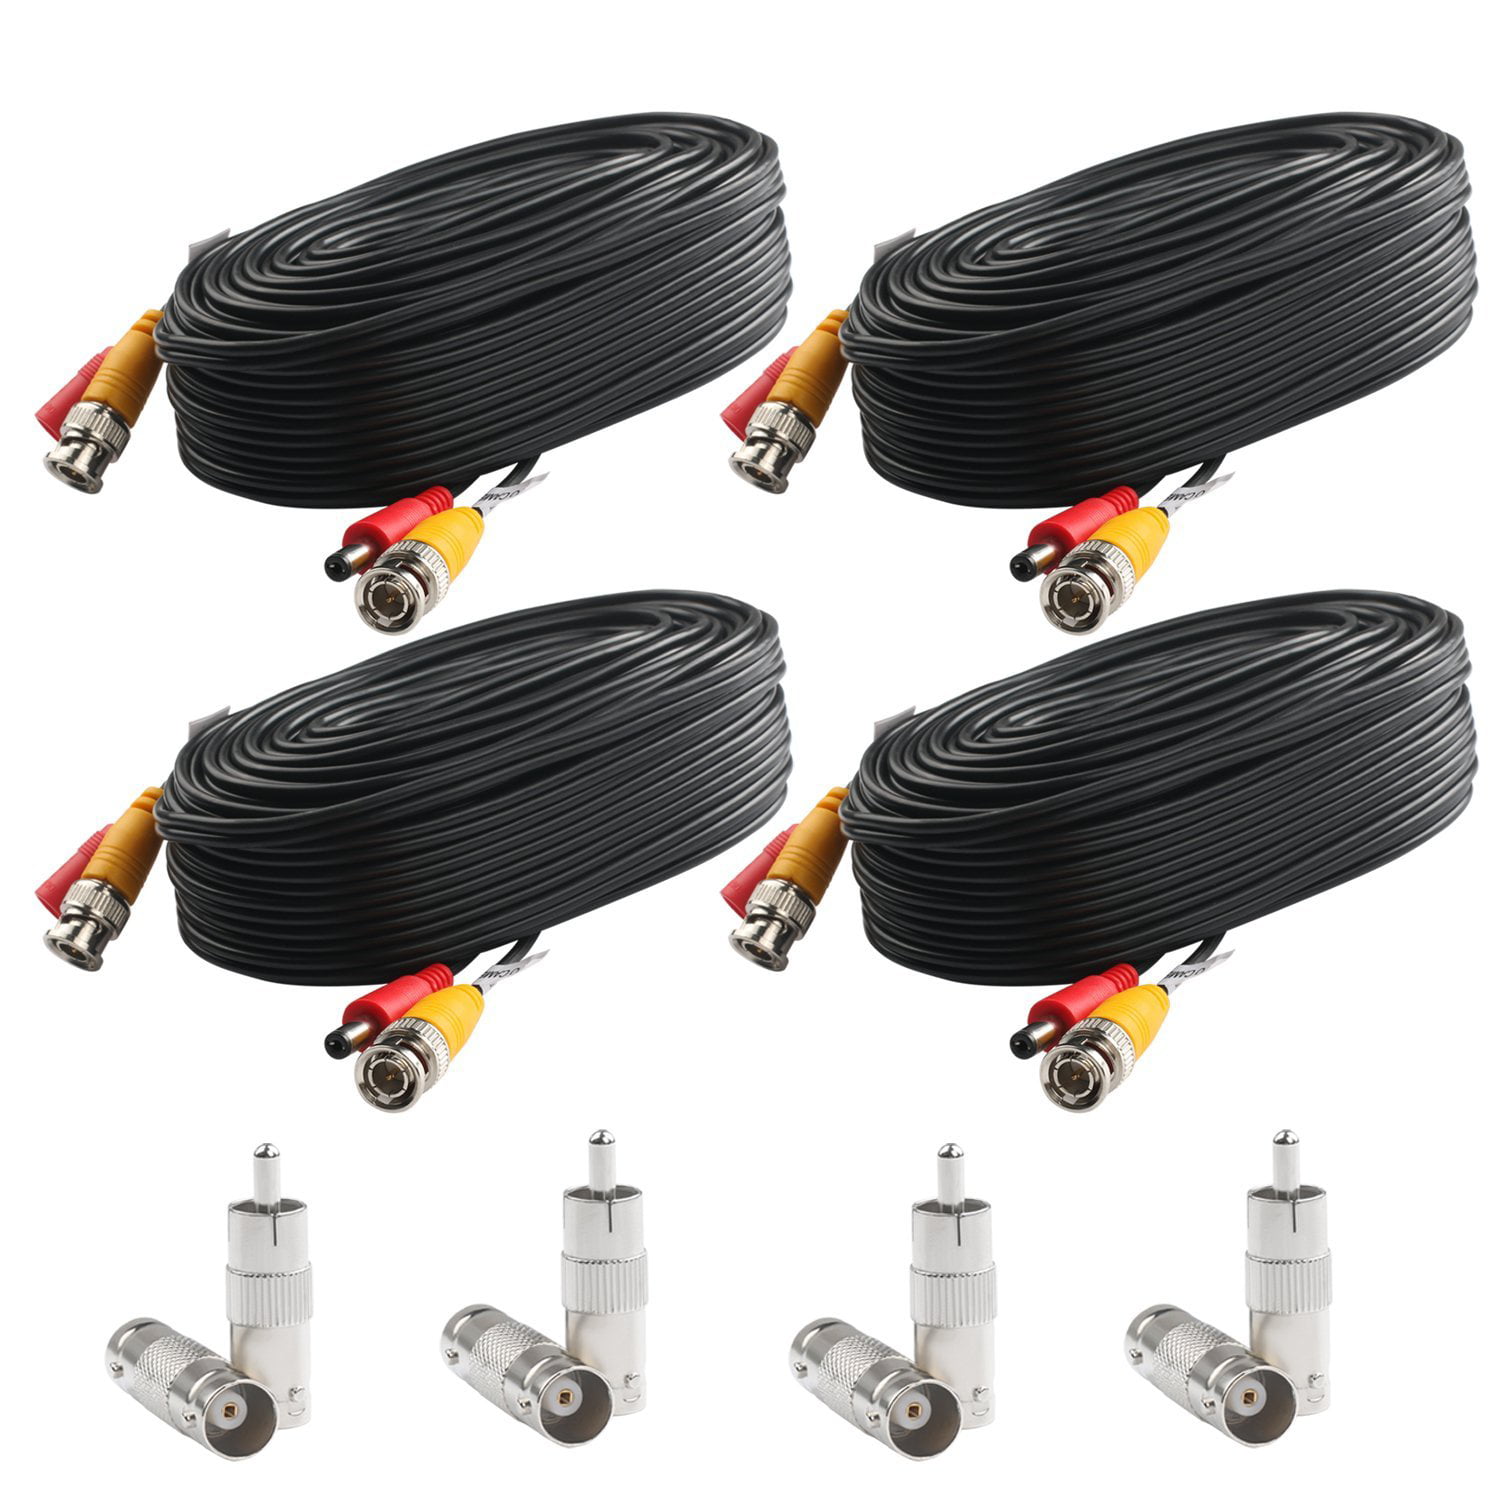 4 Postta BNC Video Power Cable Pre-Made 25 FT 4 Pack 25 Feet 